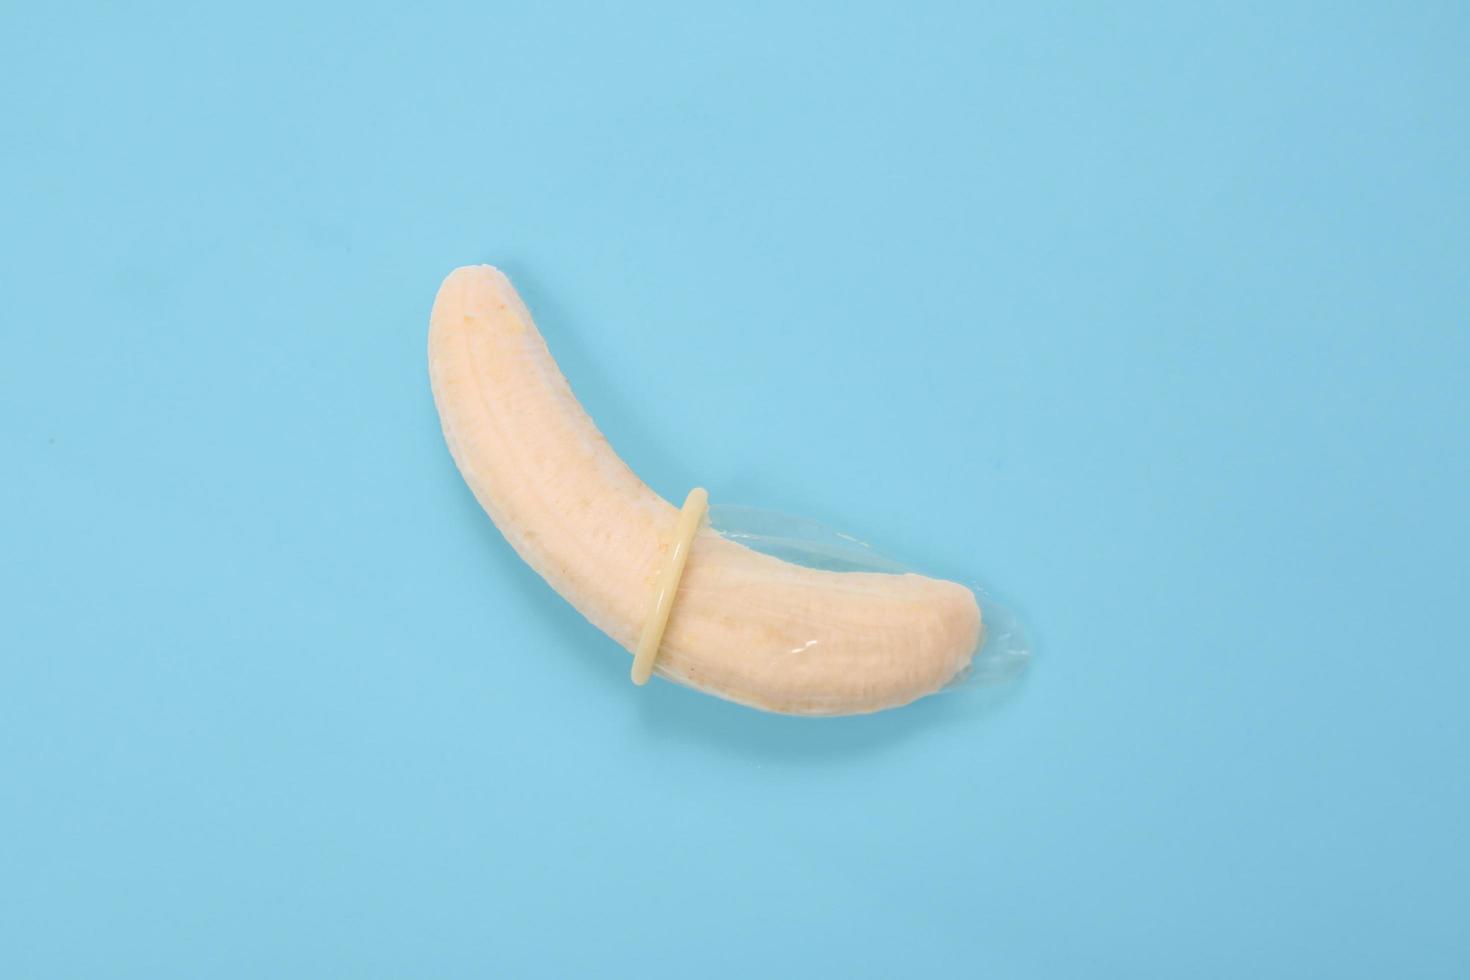 sex education with banana and condom isolated on blue background photo